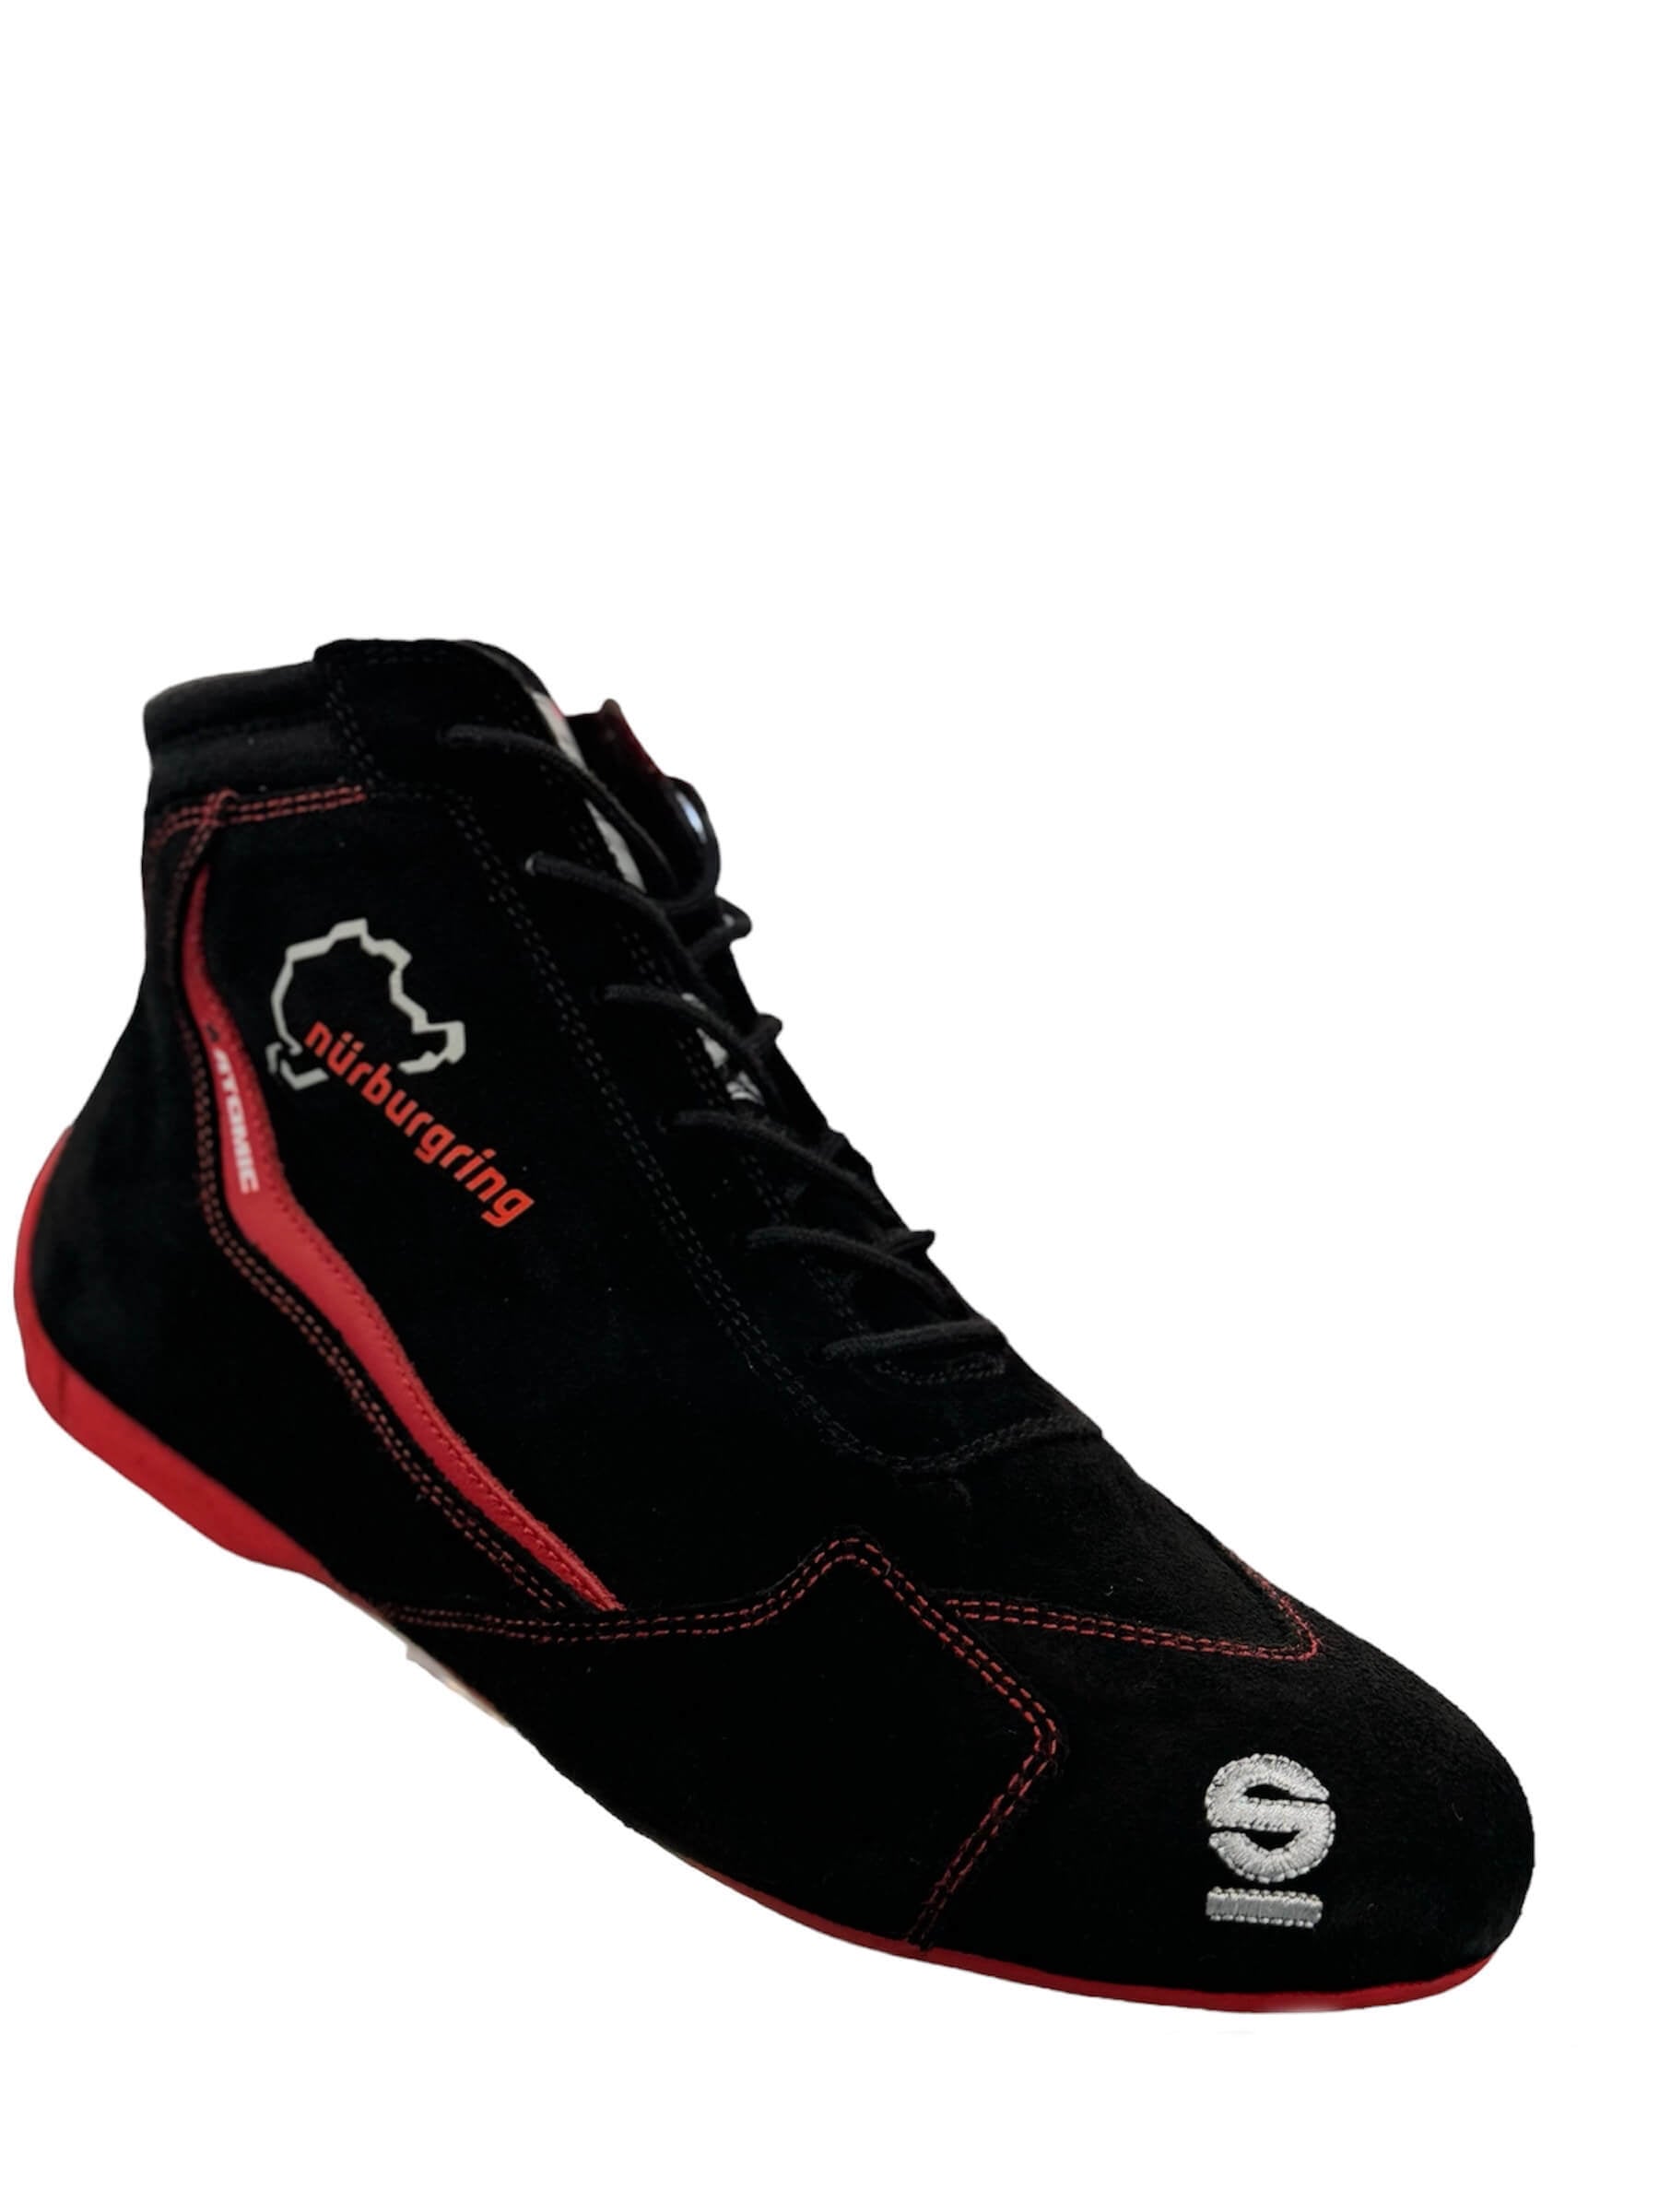 SPARCO 001295SP_NBR45 Shoes Slalom Nurburgring Edition black/red Size 45 Photo-0 